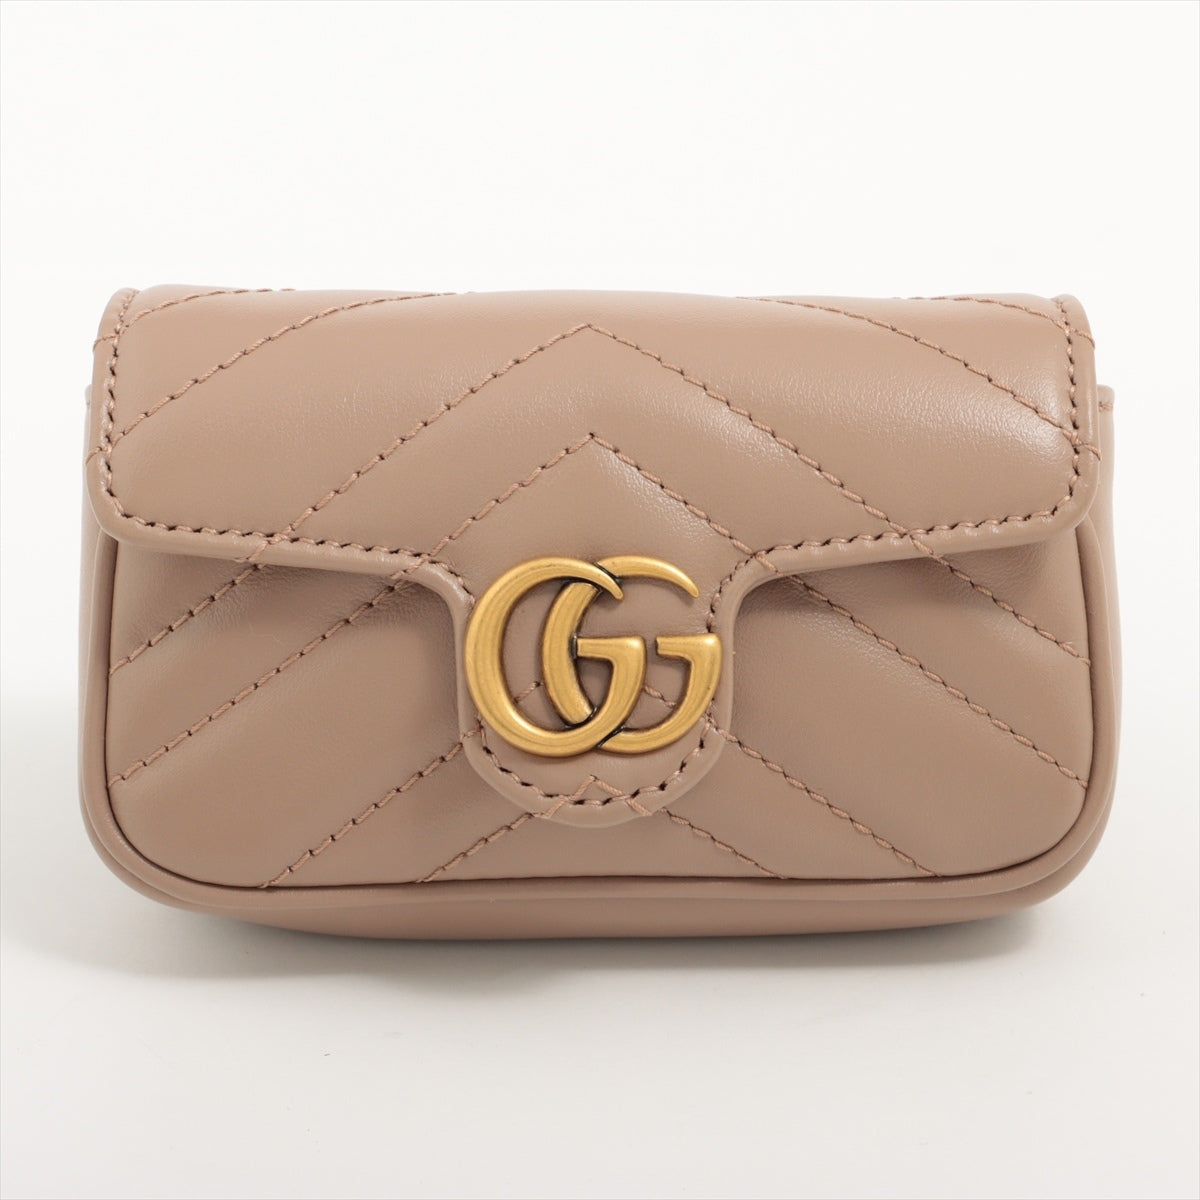 Gucci GG Marmont 575161 Leather Pouch Beige